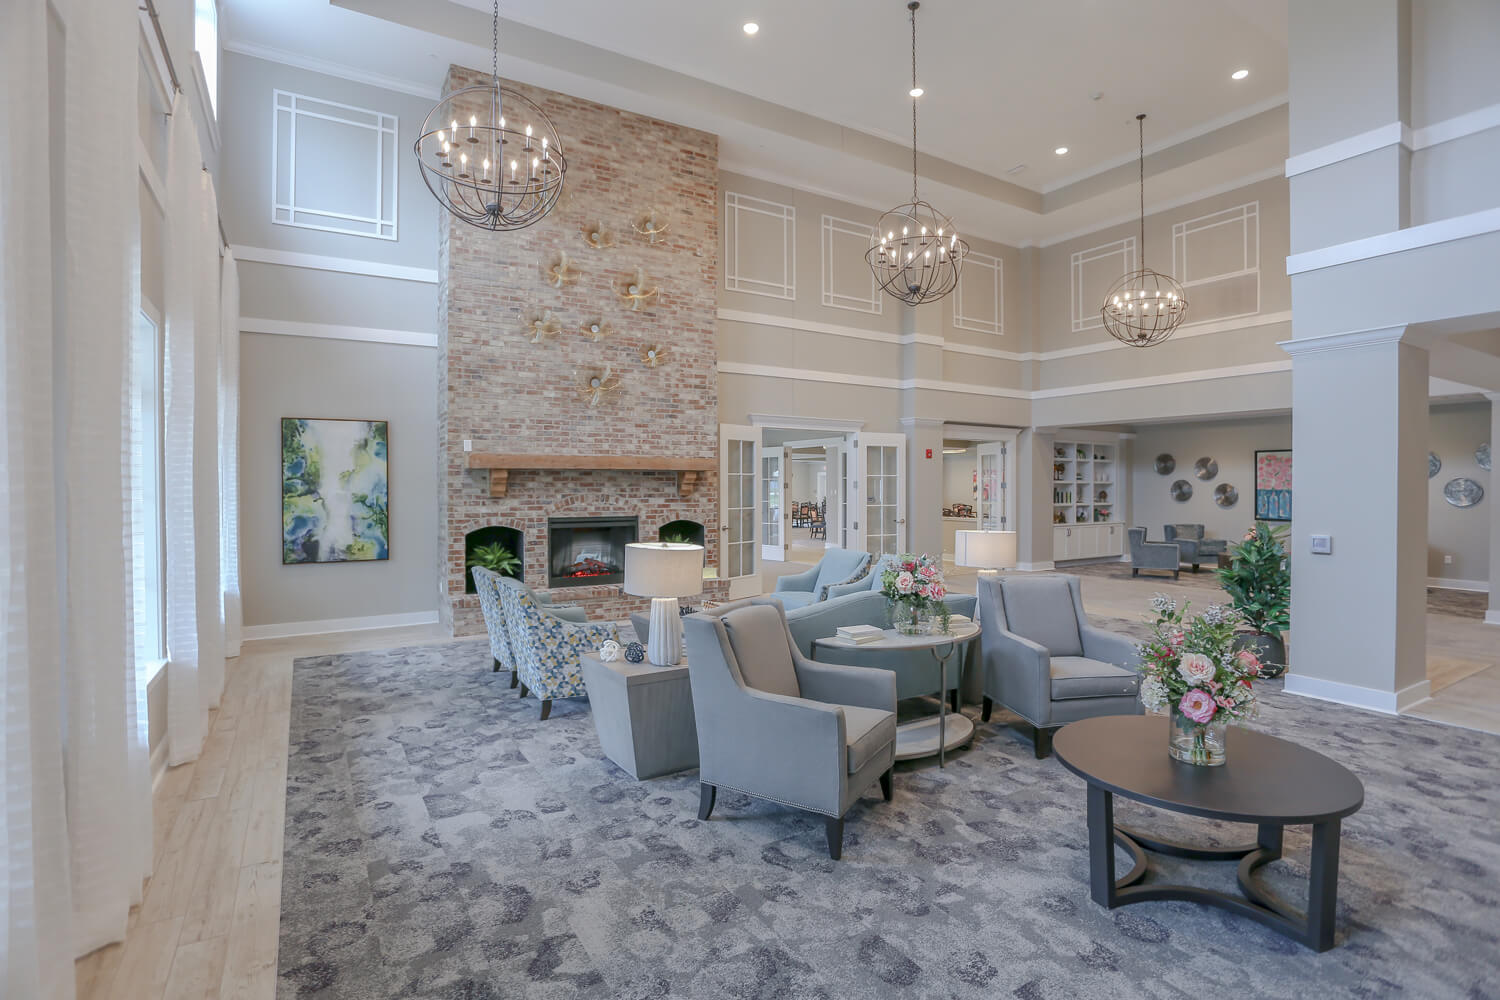 Grand South Senior Living - Front Gathering Room - Designed by Foshee Architecture